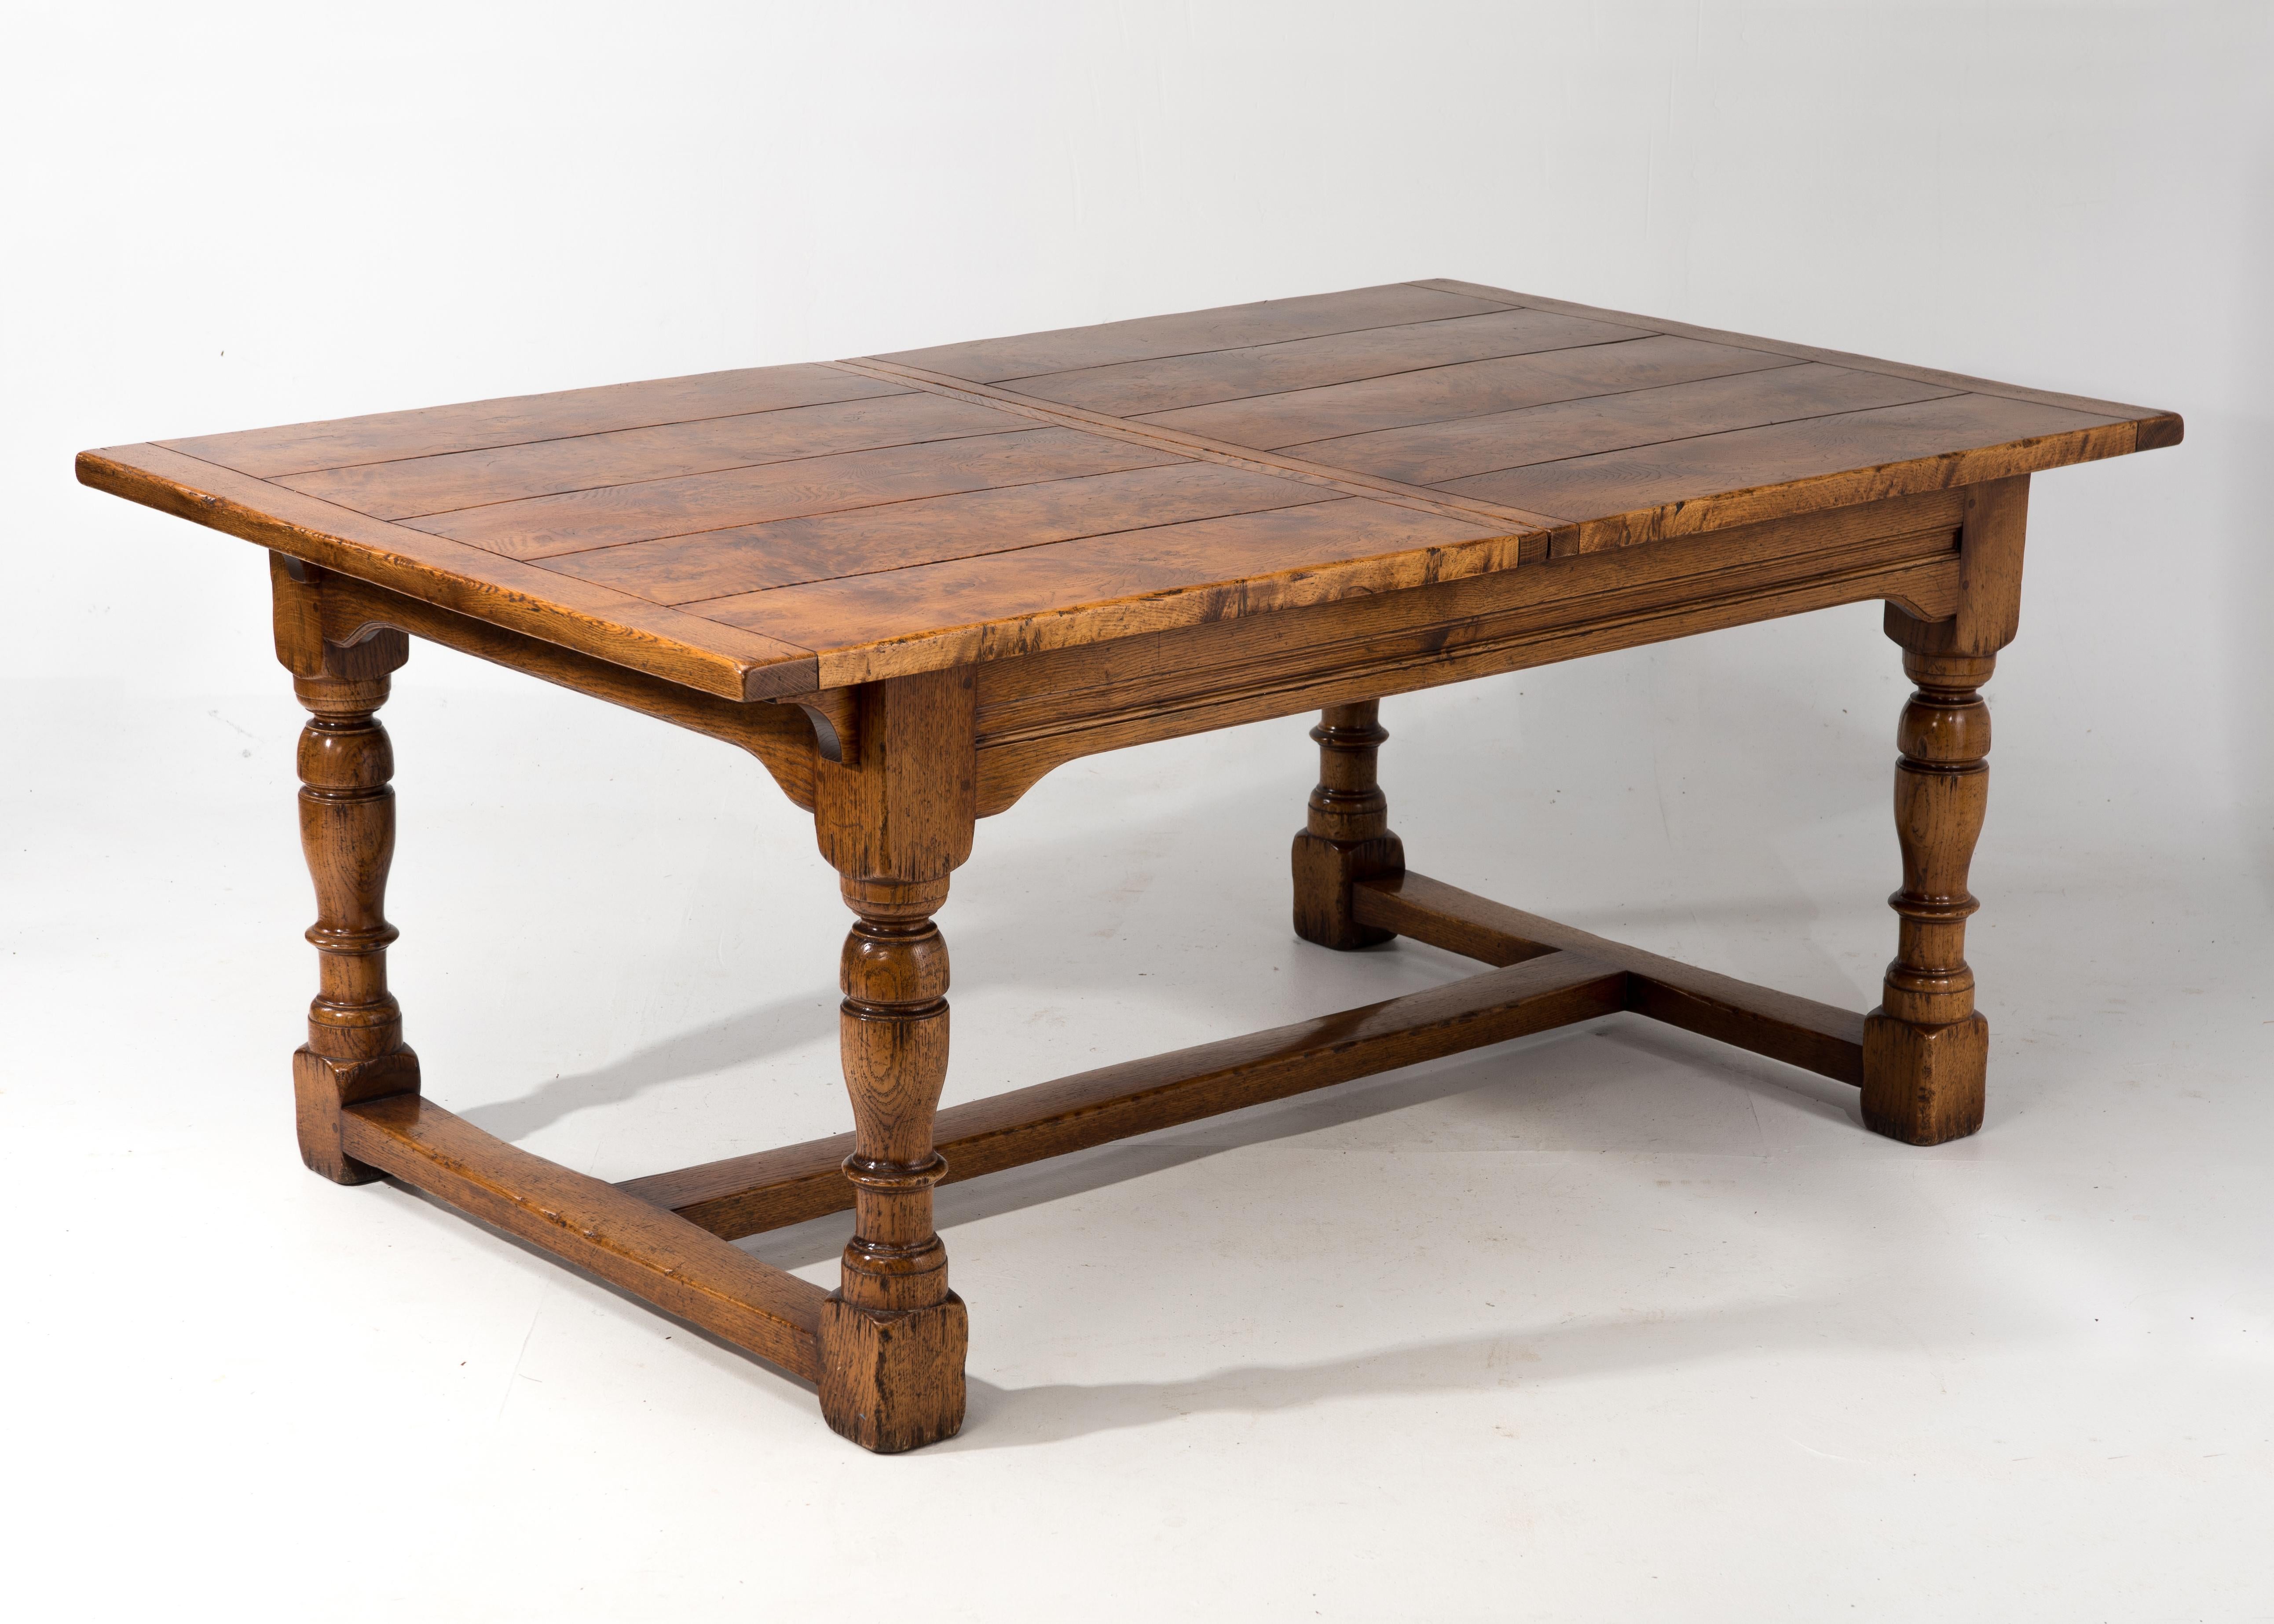 Late 19th Century Impressive Beautifully Crafted Burled Walnut Refectory Dining Table